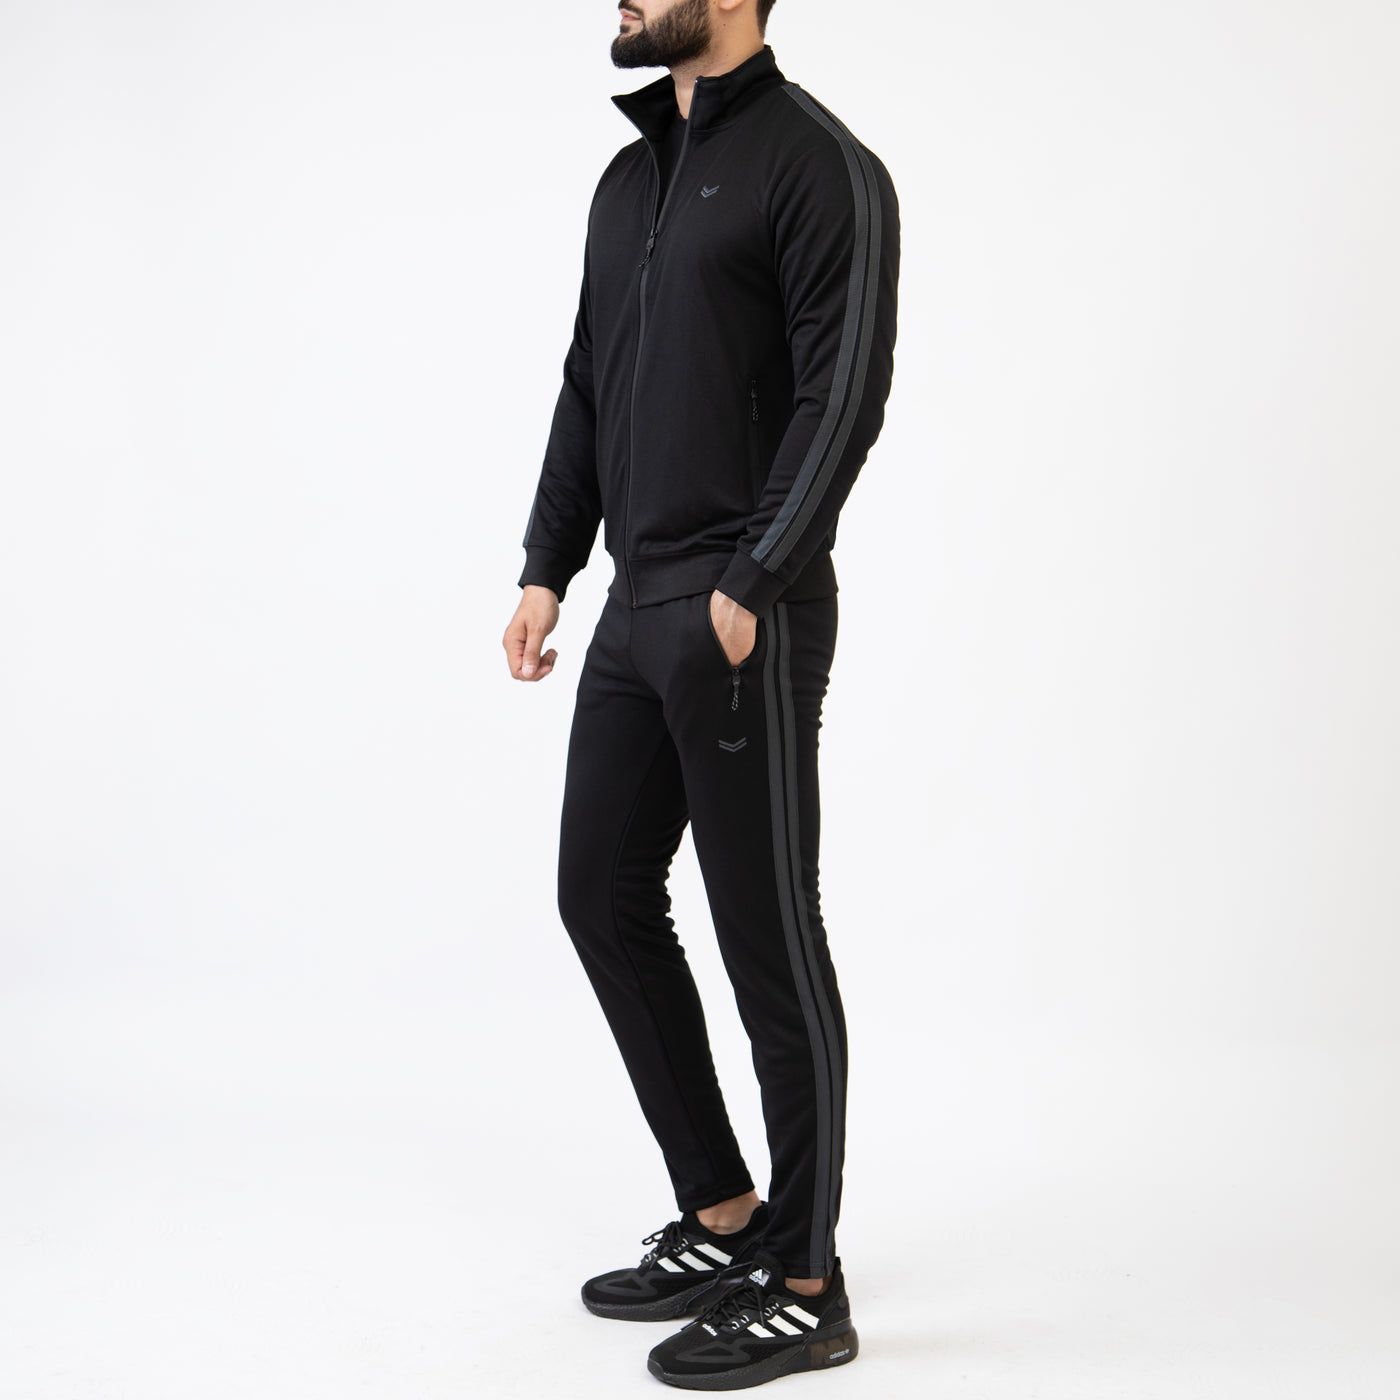 Black Mock-Neck Zipper Tracksuit with Two Gray Stripes